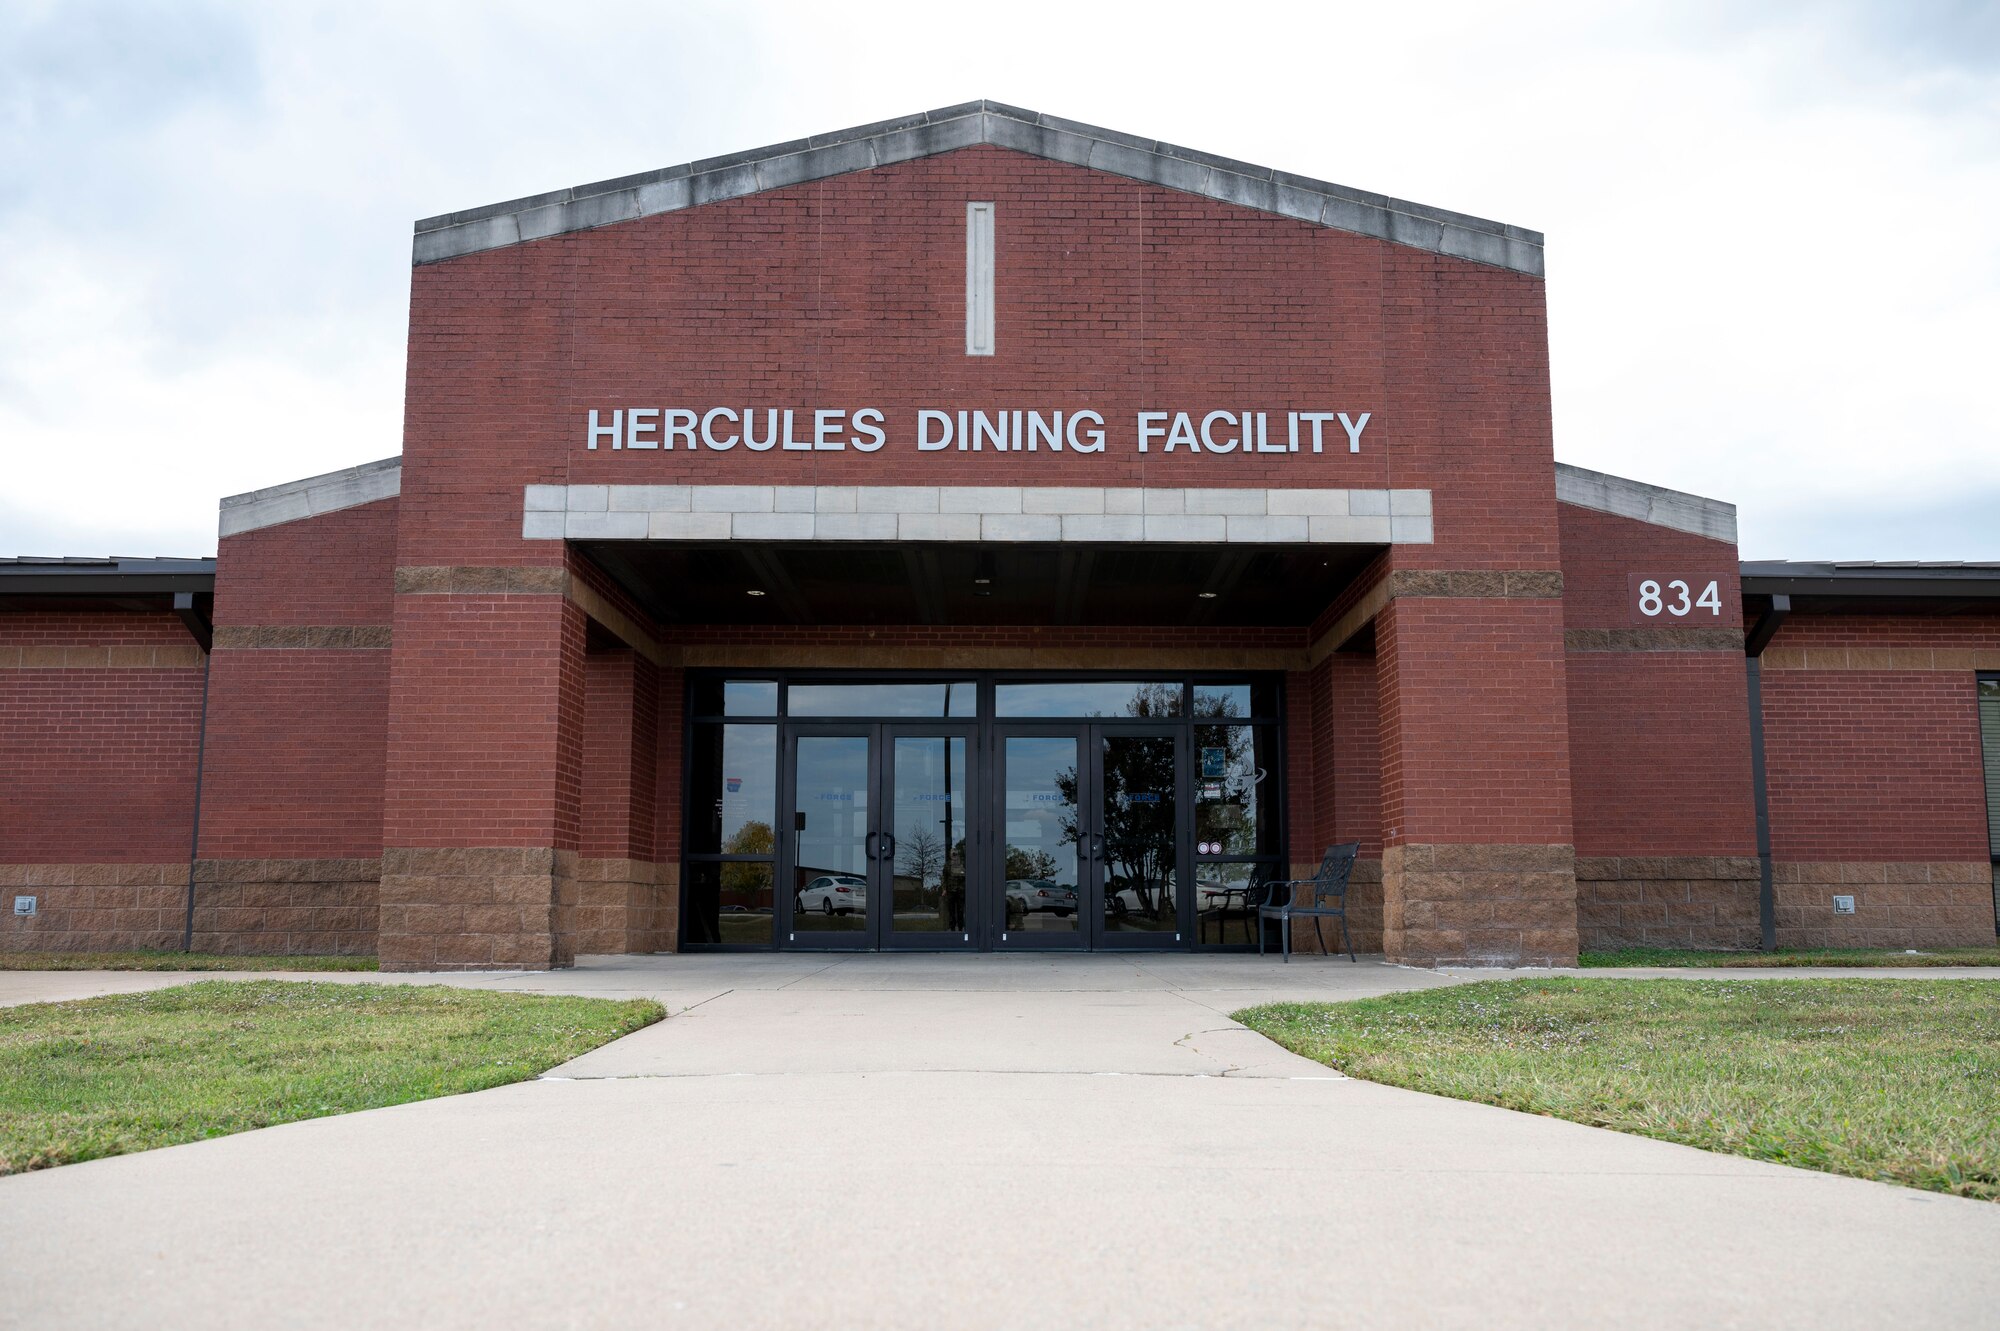 The outside of the dining facility building.